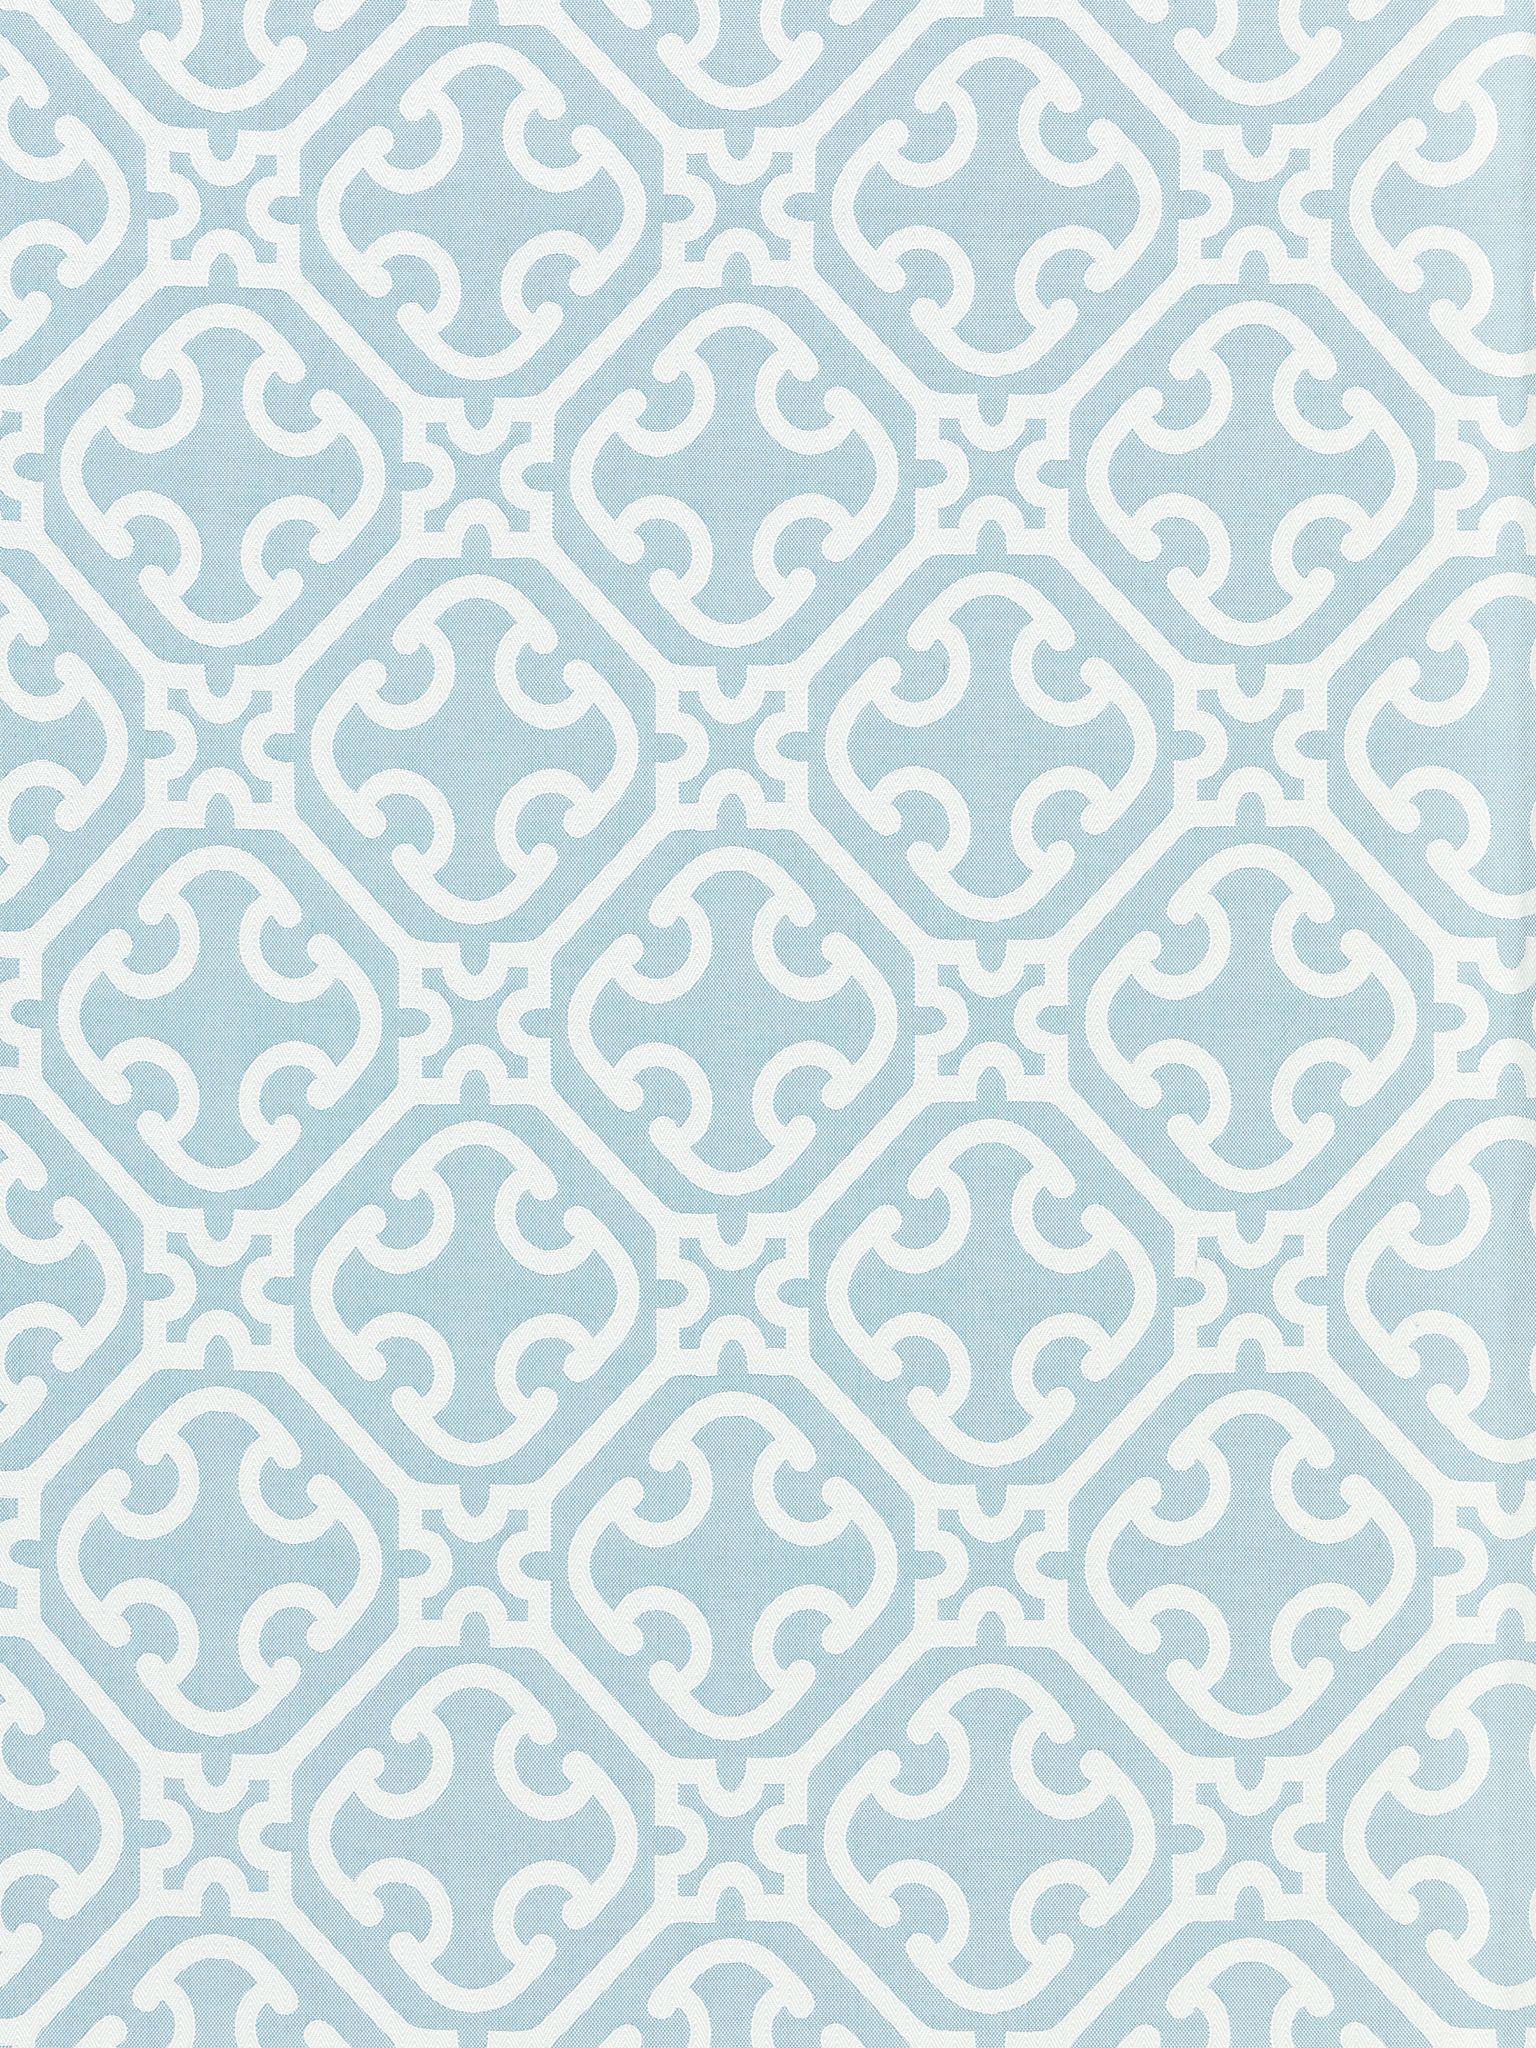 Ailin Lattice Weave fabric in capri color - pattern number SC 000327214 - by Scalamandre in the Scalamandre Fabrics Book 1 collection